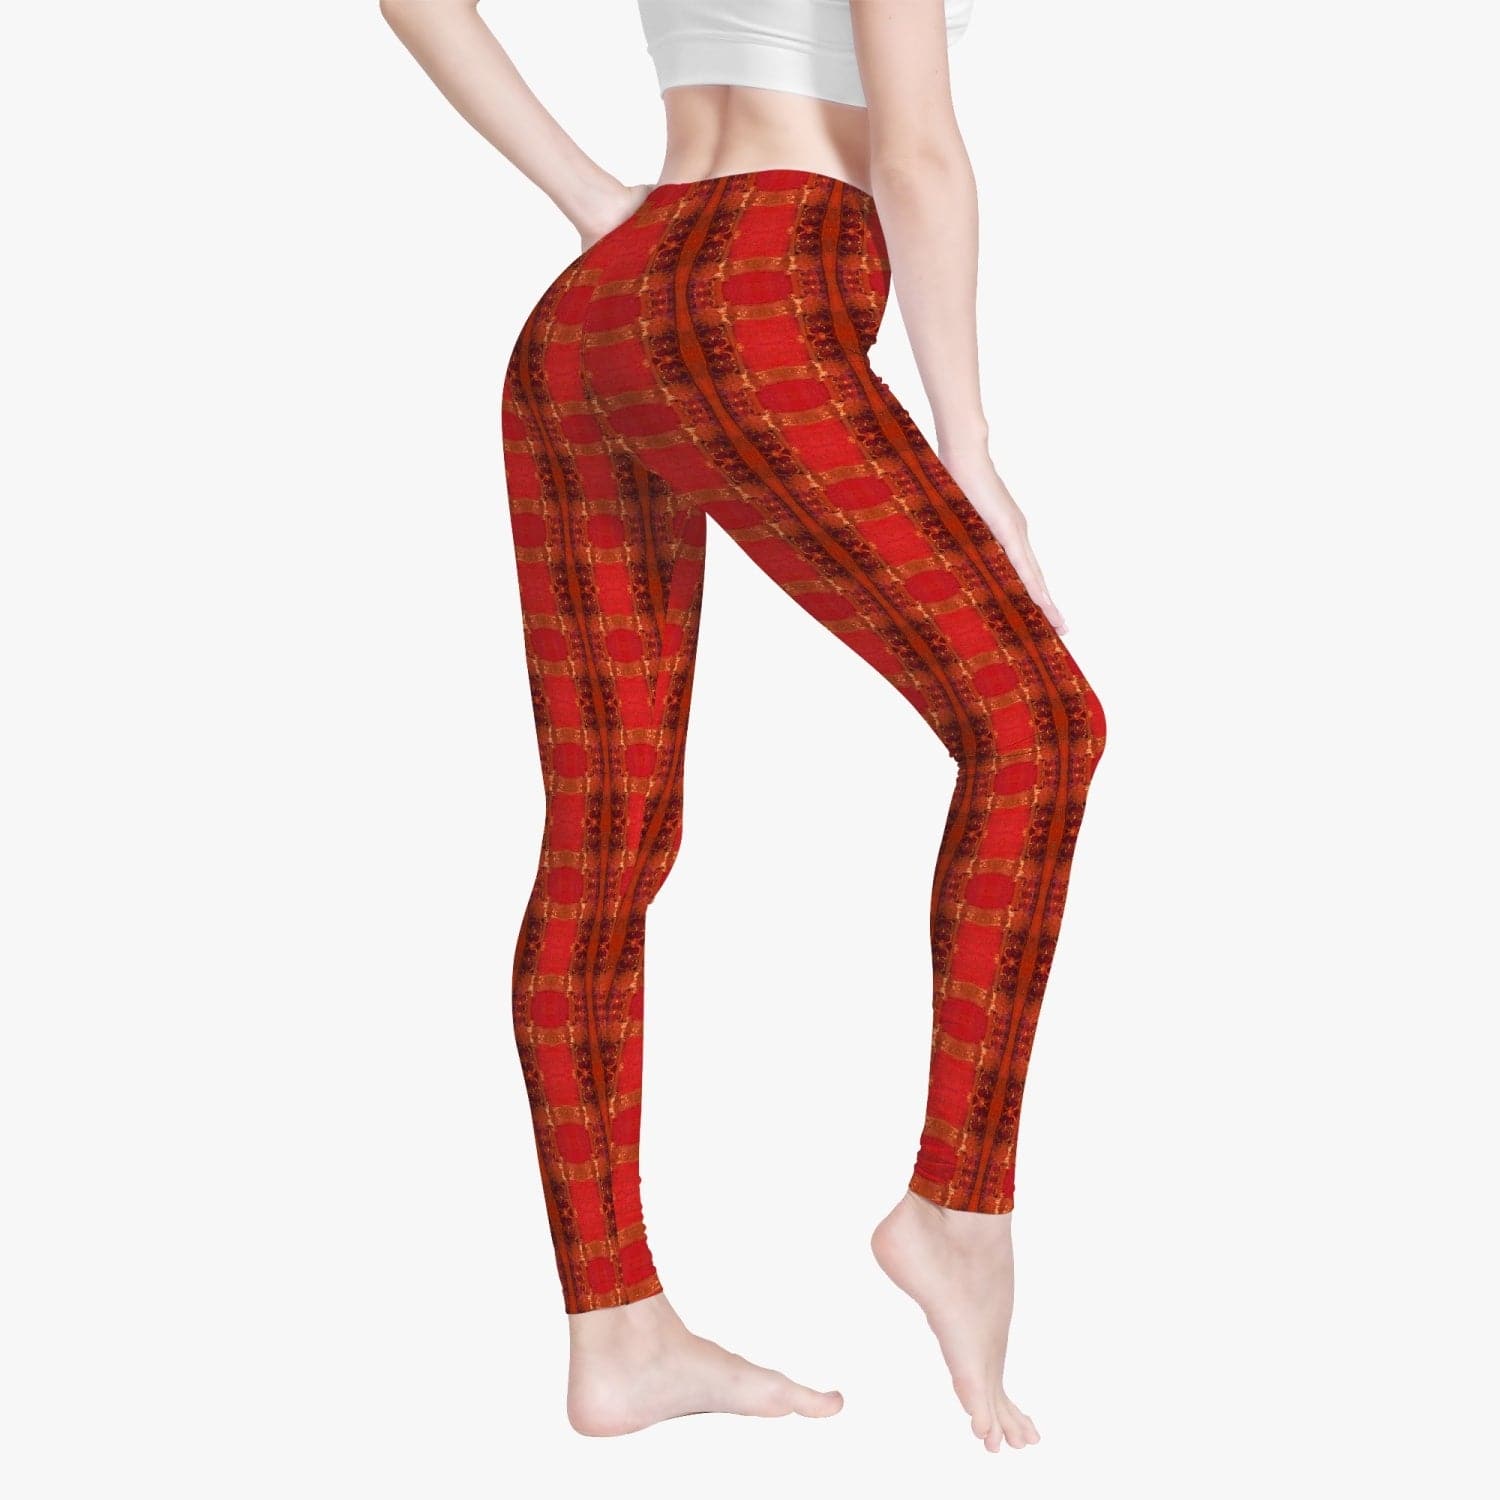 Active Red Yoga Pants for Women by Sensus Design